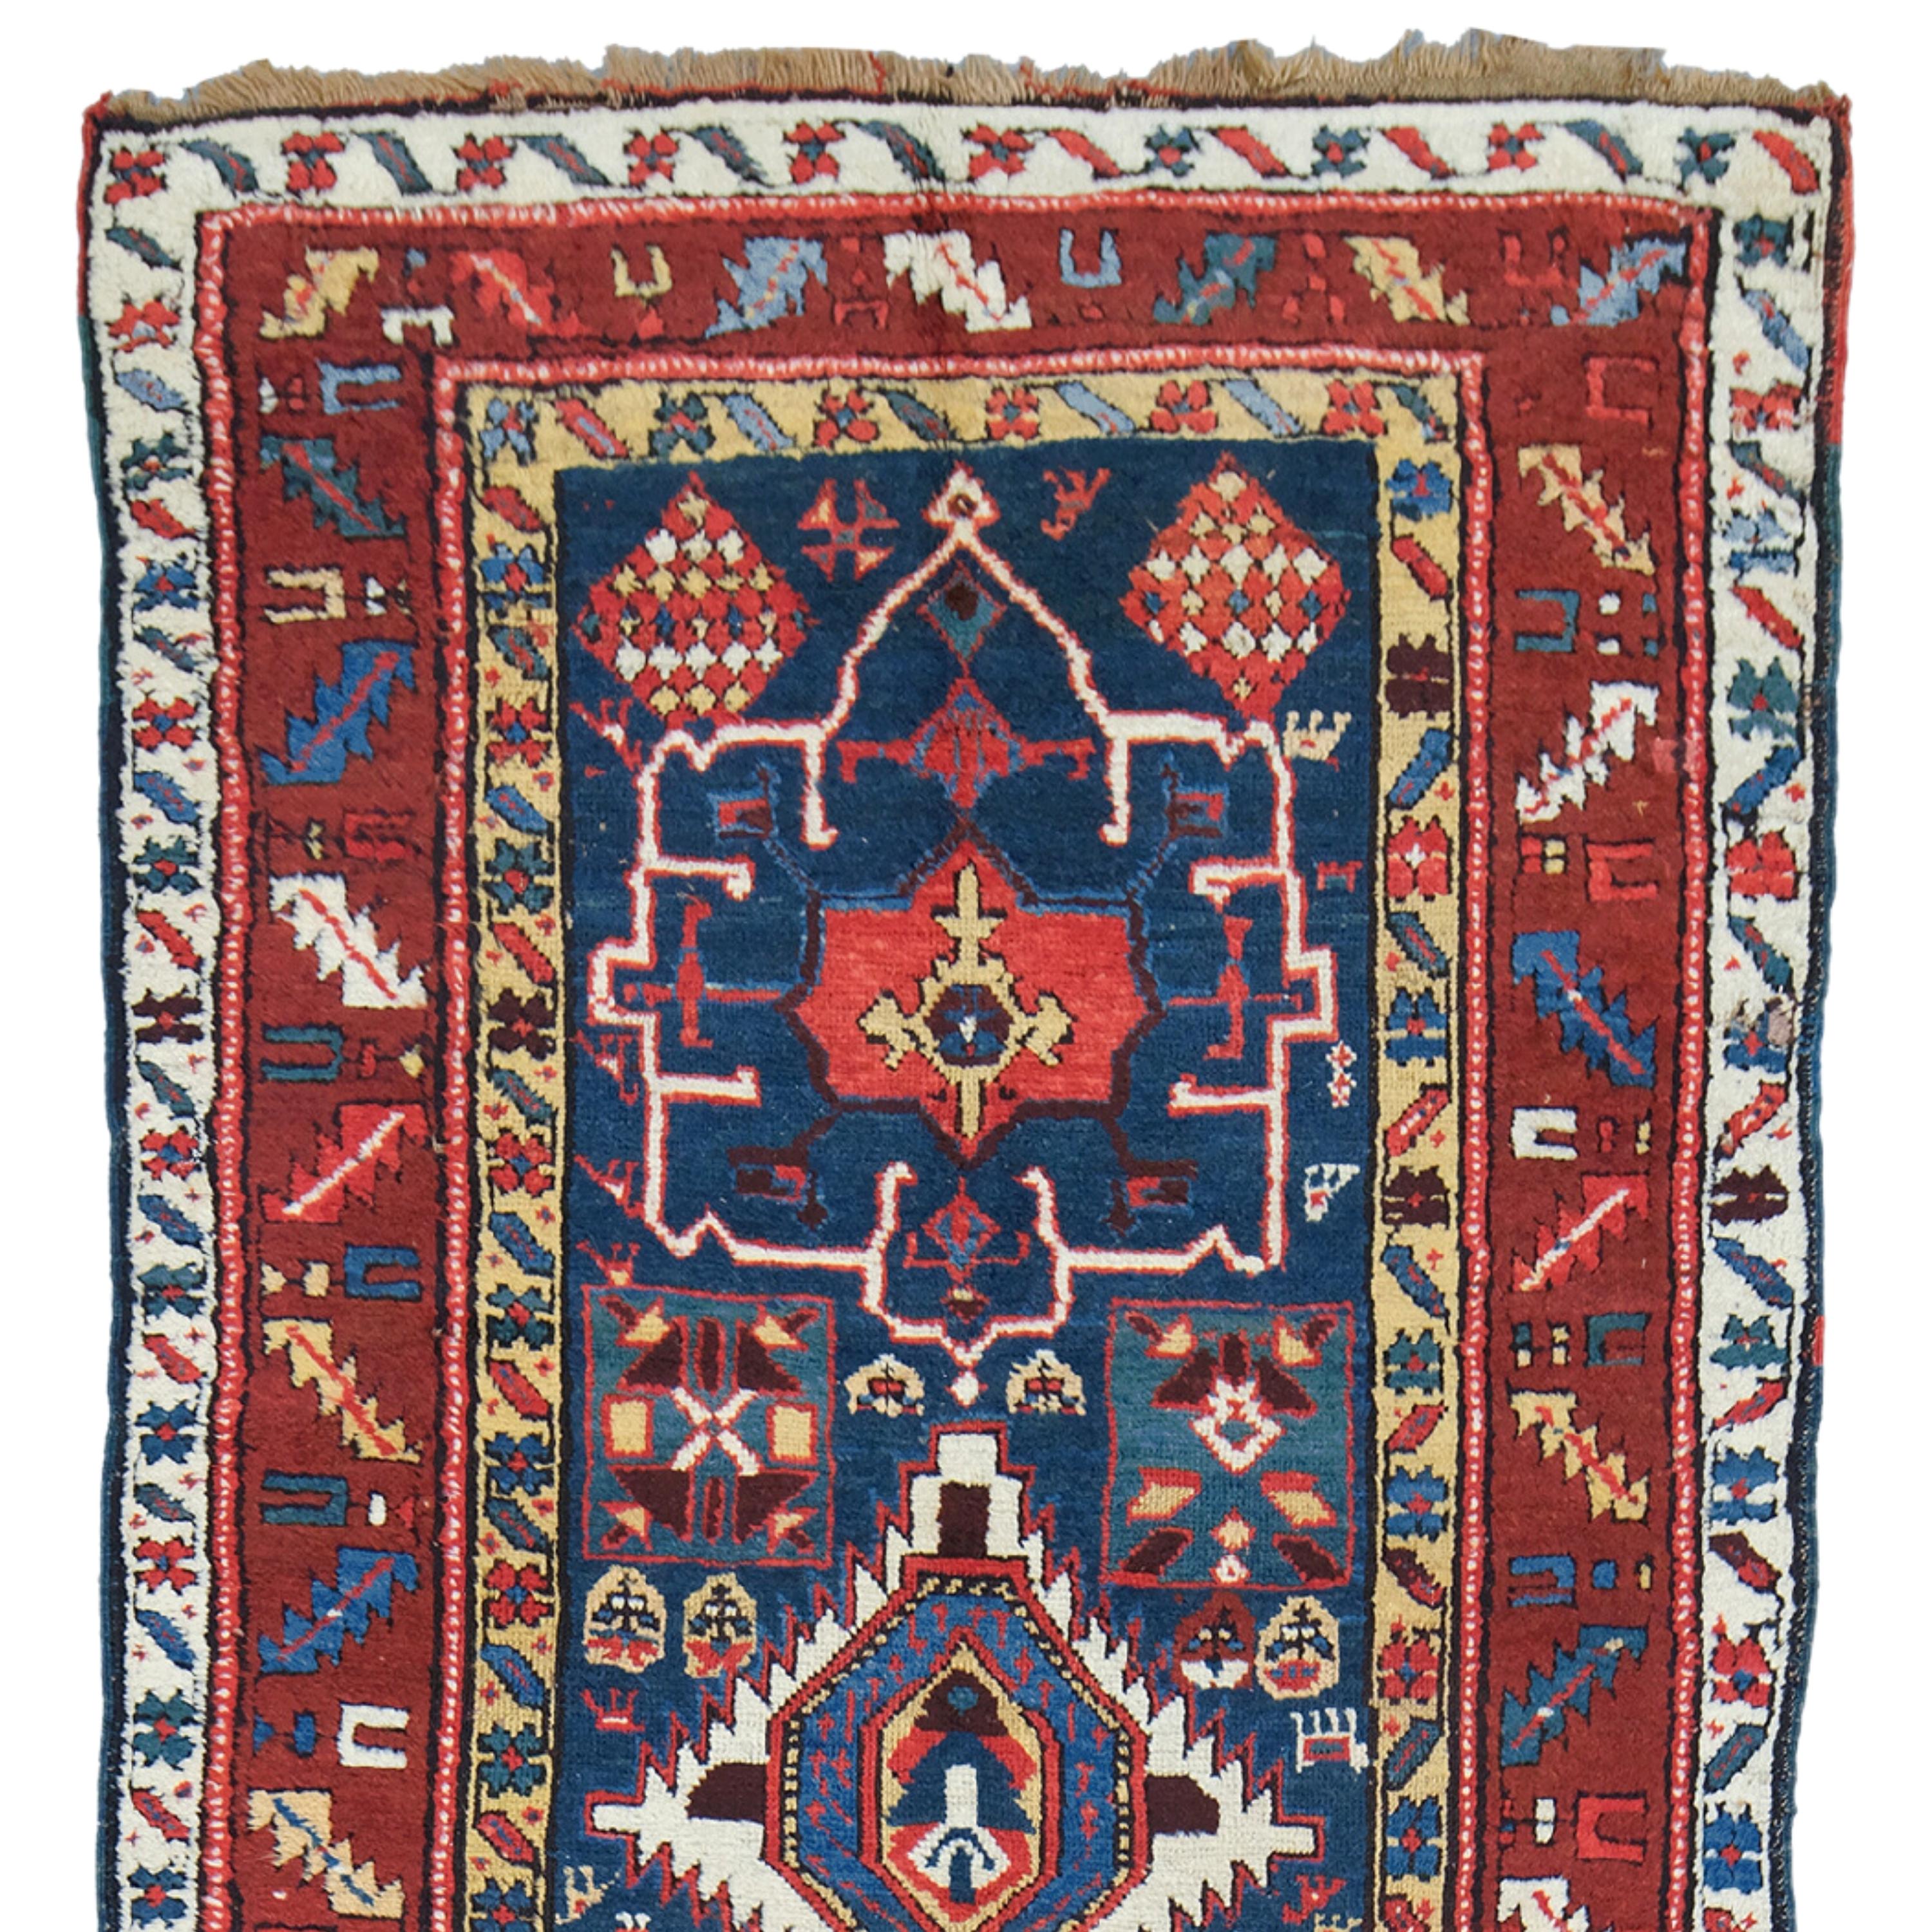 19th Century Caucasus Runner, Handmade Wool Runner

This elegant antique Caucasian runner brings the elegance and craftsmanship of the 19th century to the present day. Knitted from high quality materials, this rare piece has the beauty and charm to